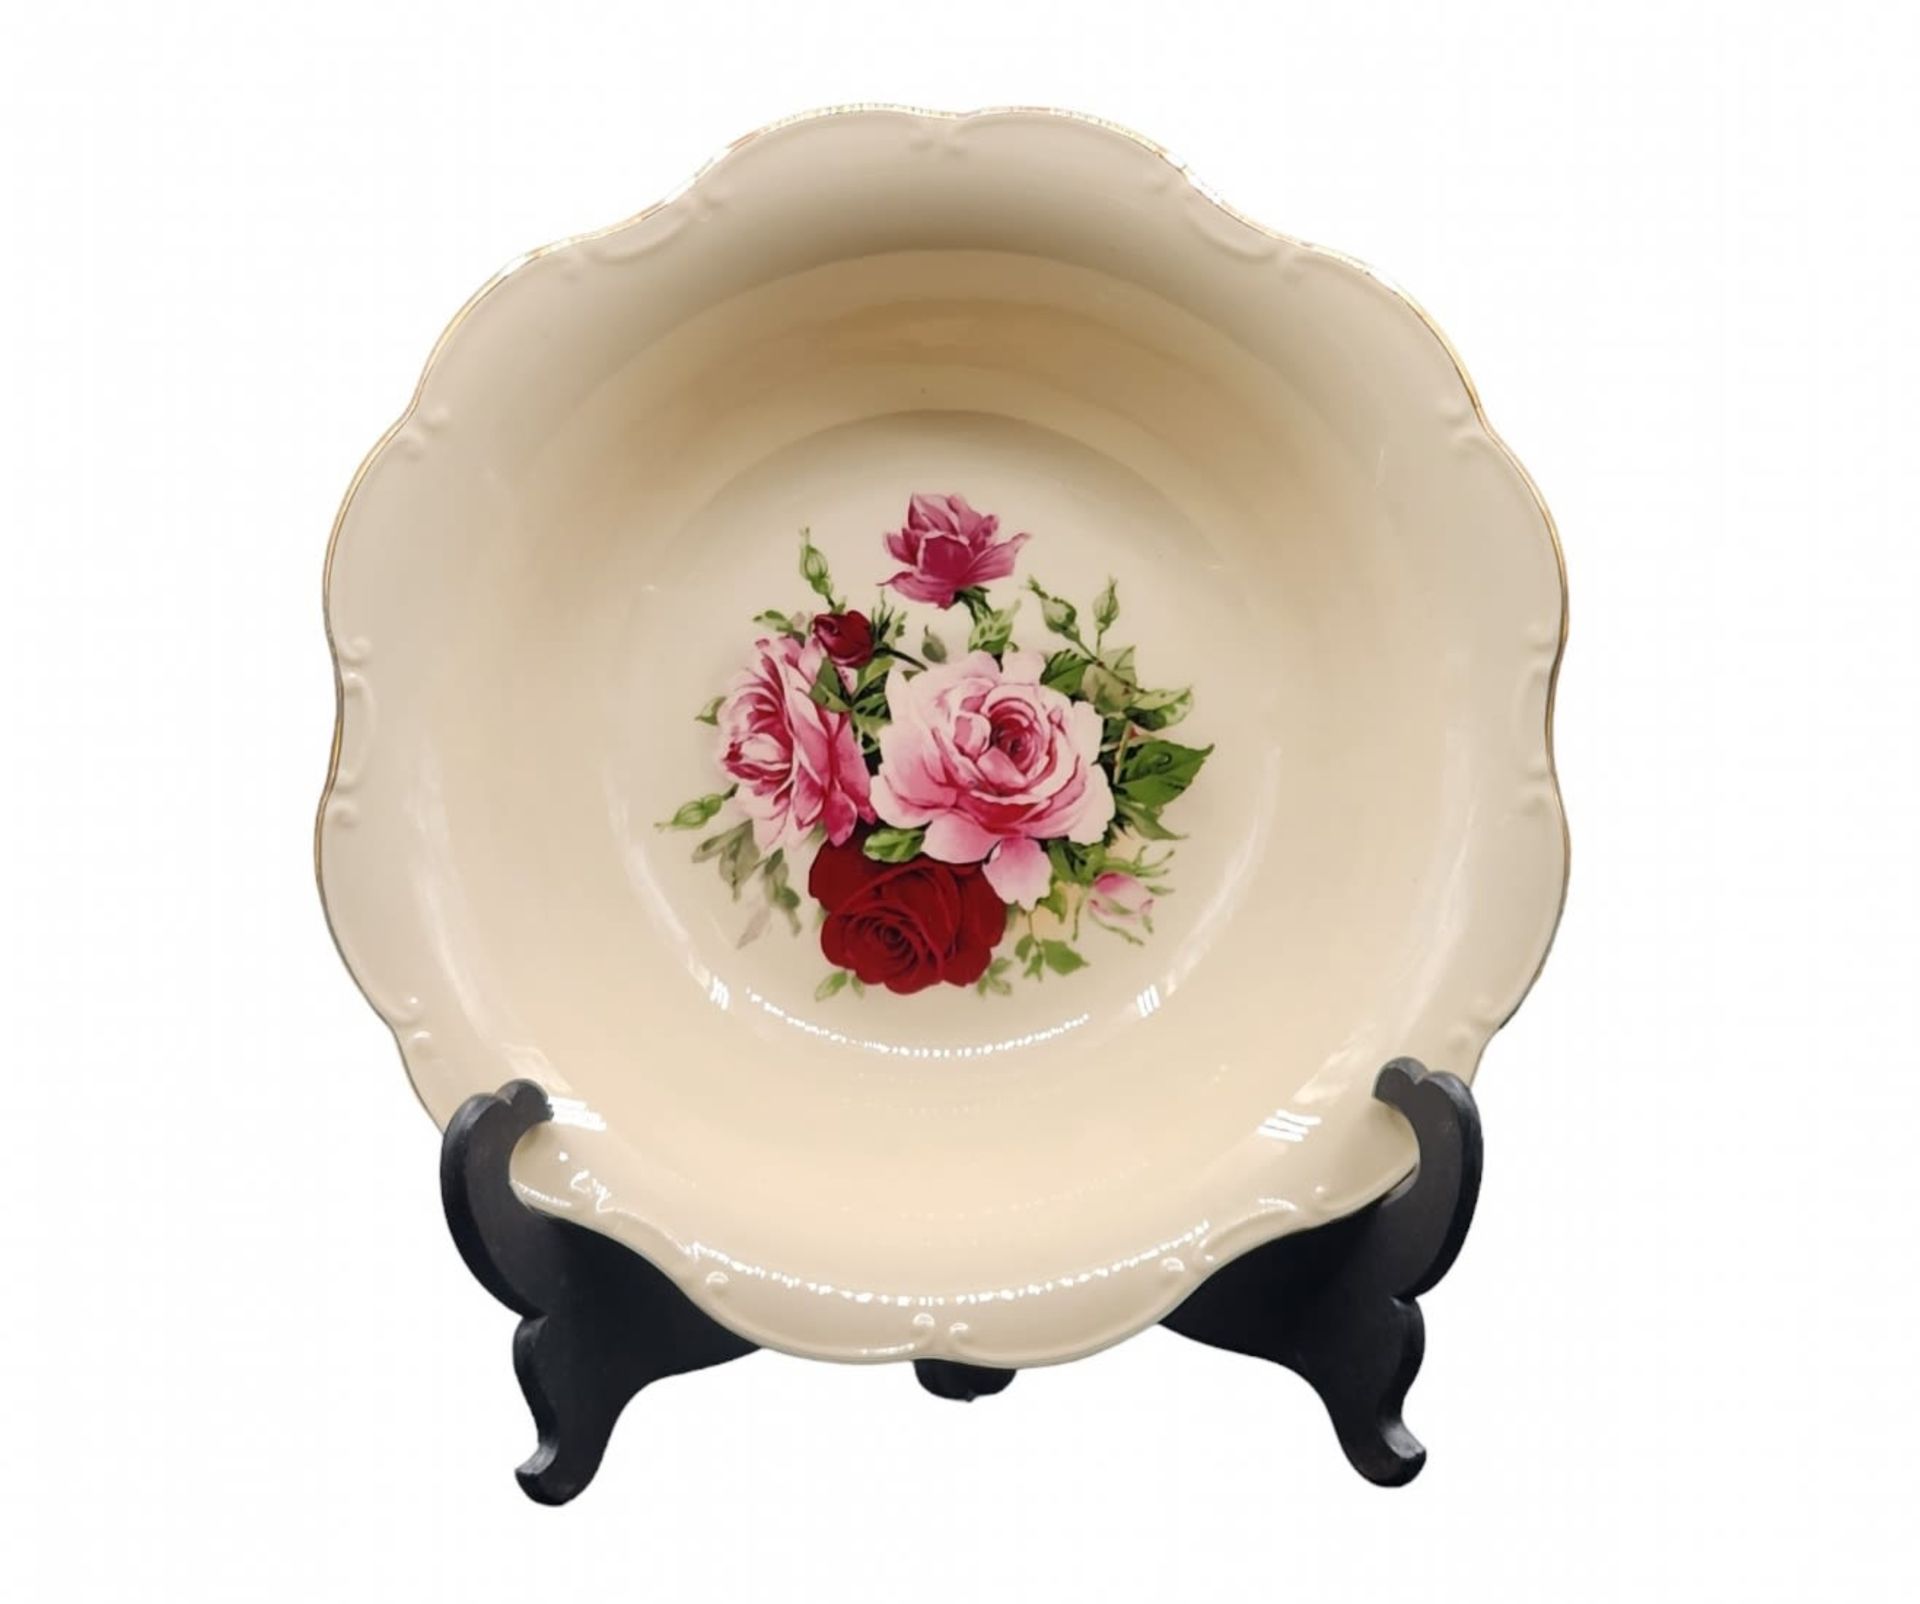 Porcelain bowl, a deep bowl for serving fruit, decorated with a print of blooming roses and a gold